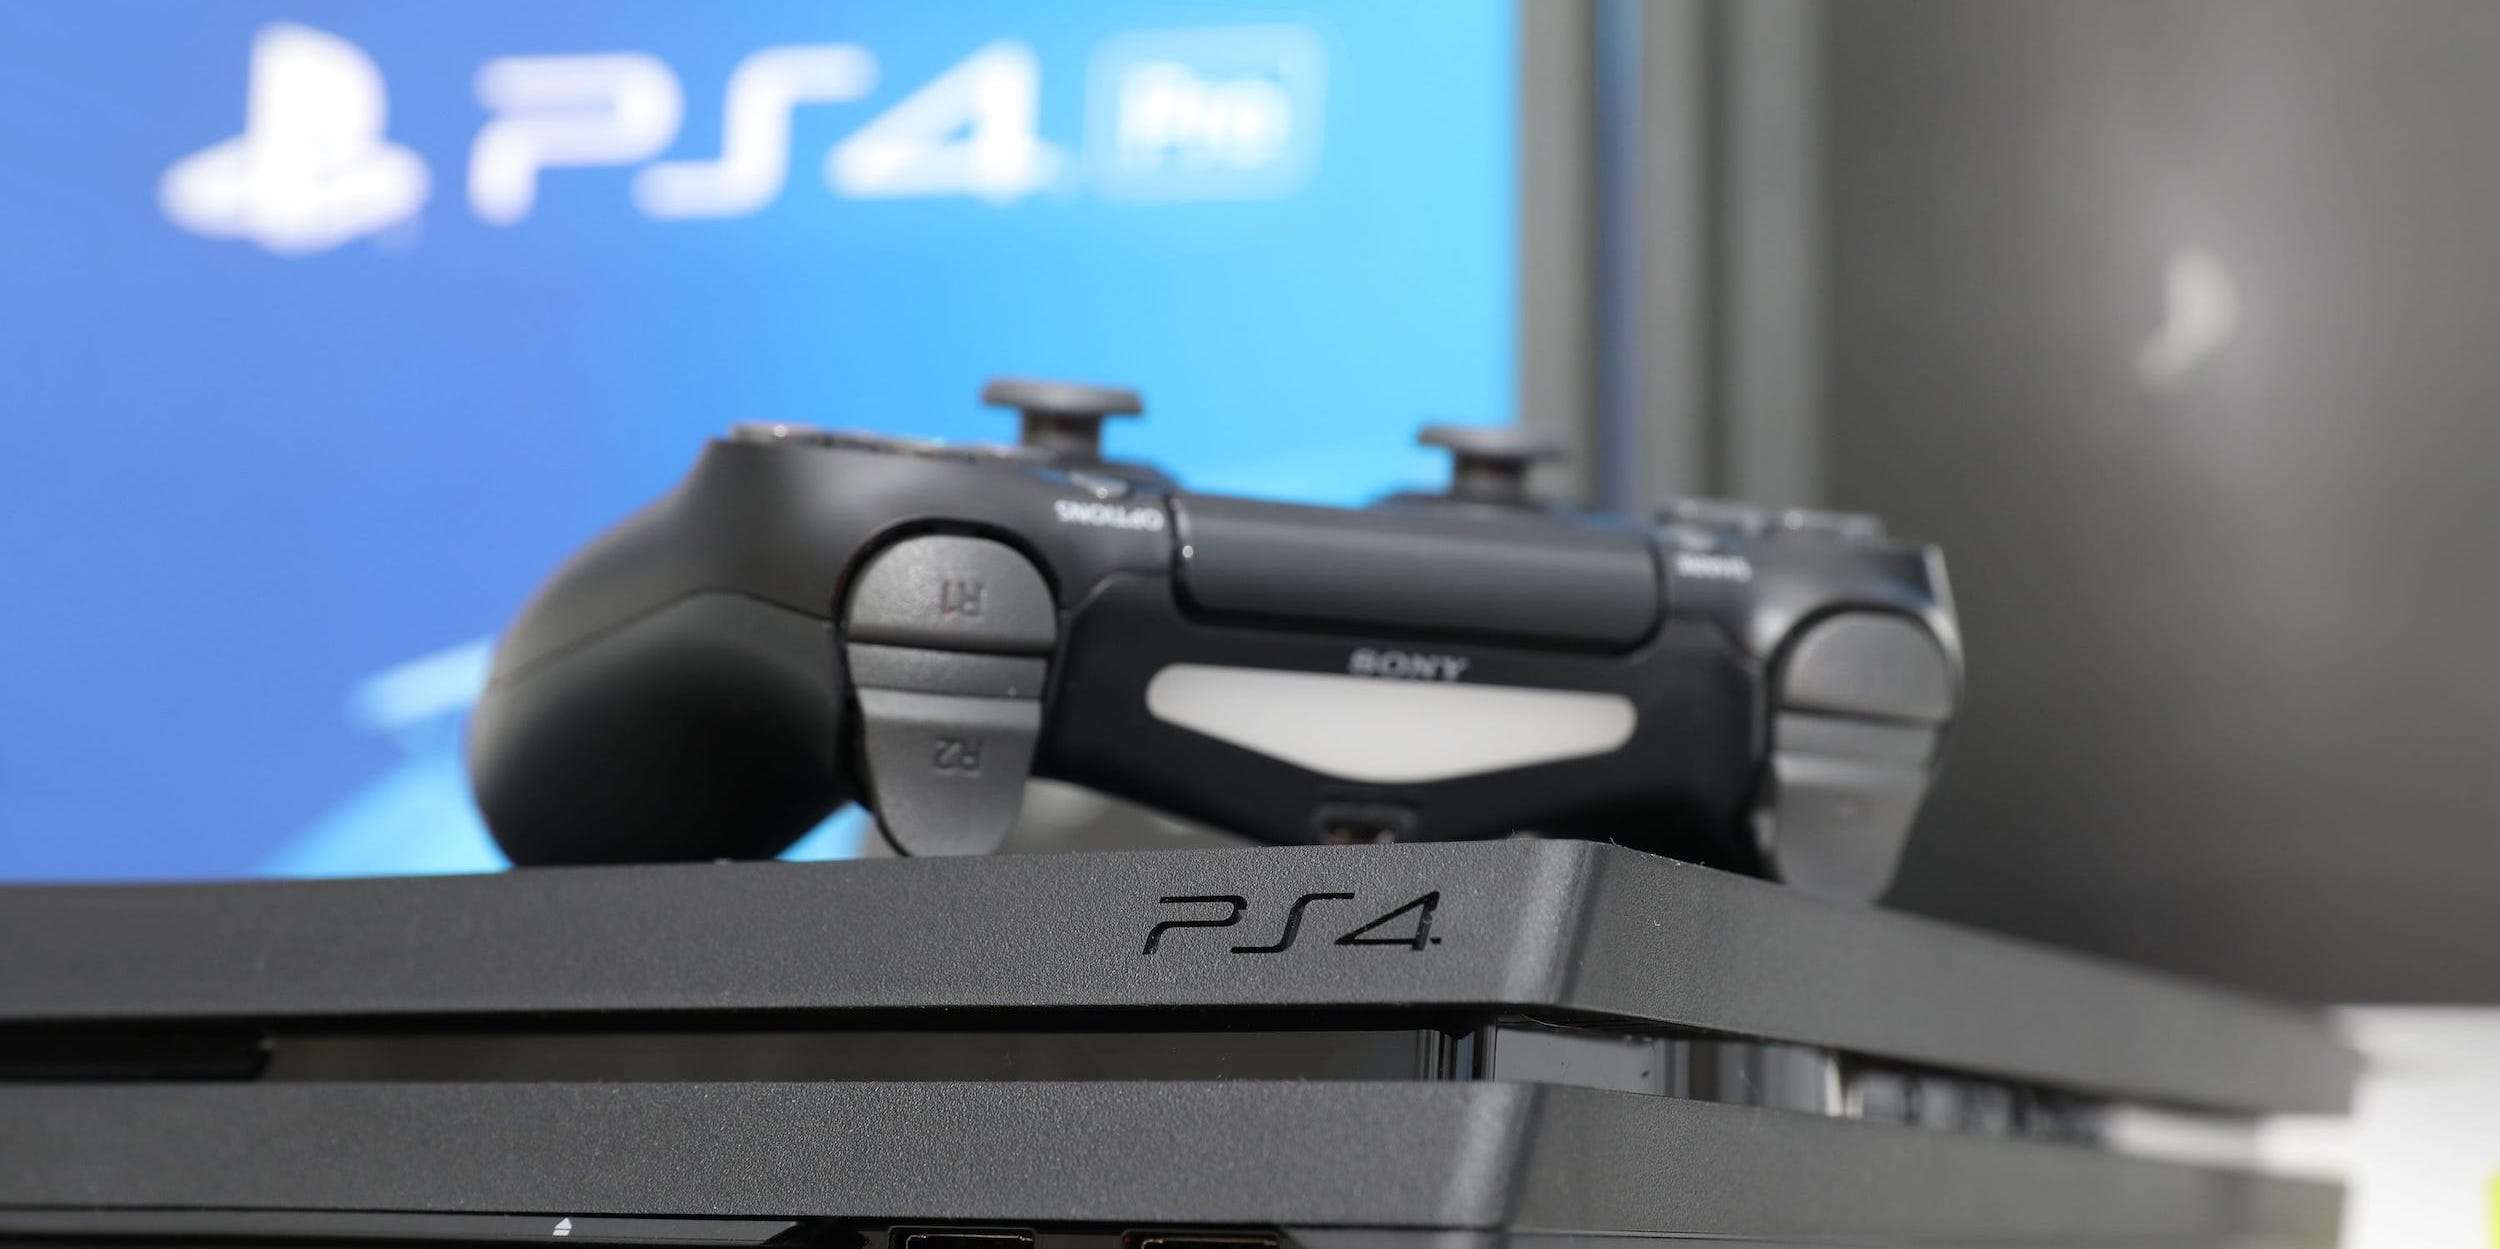 How to redeem a gift card code on your PS4 so that you can ...